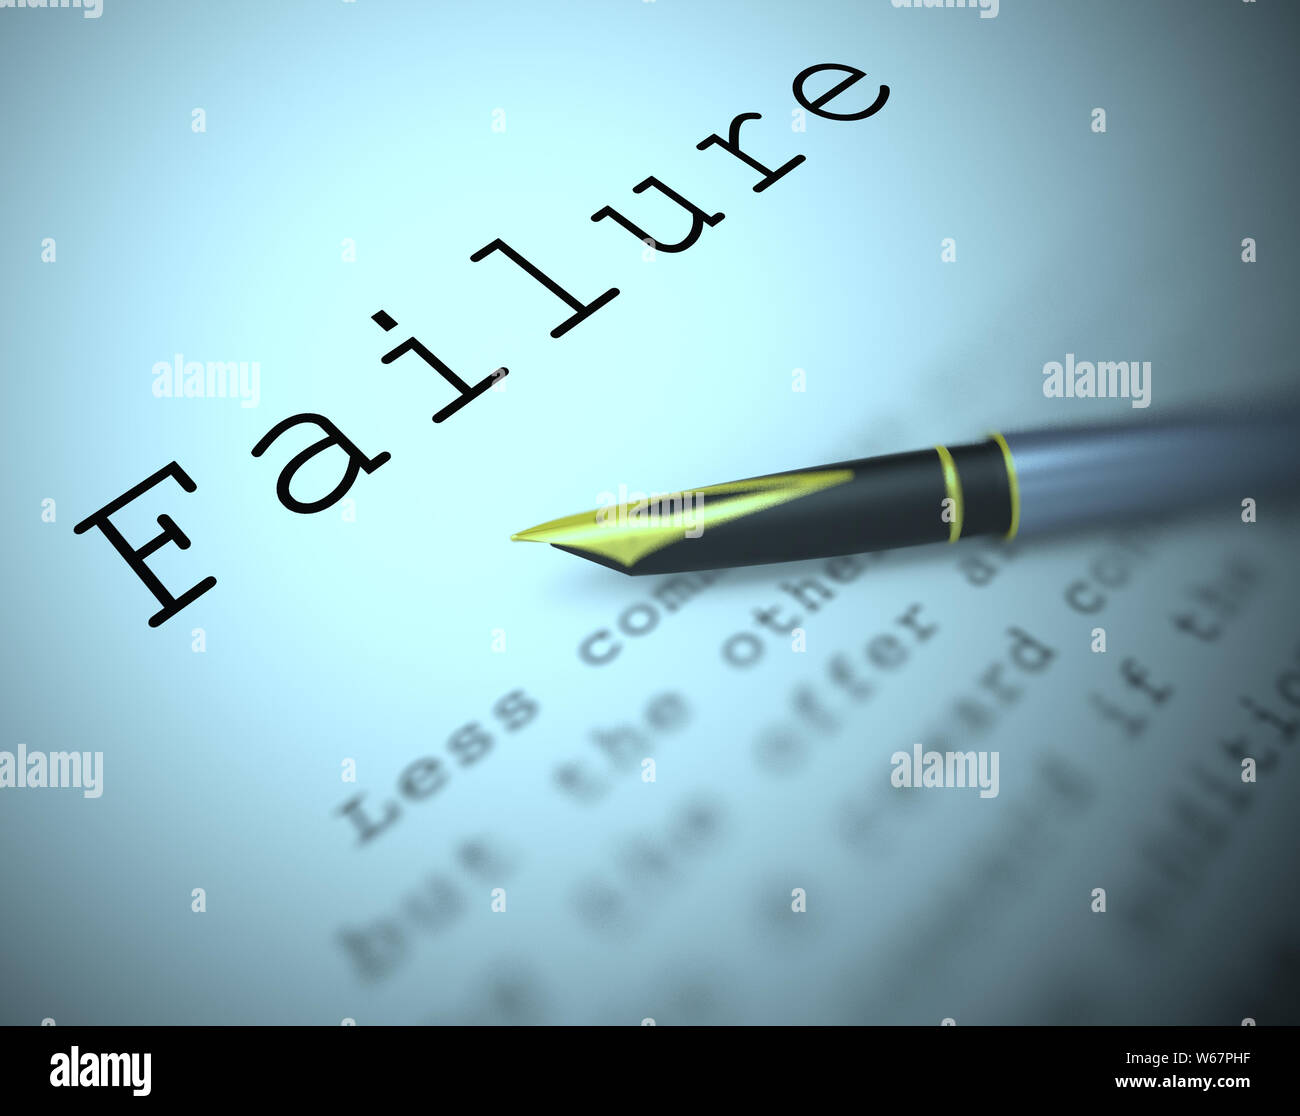 Failure definition shows failing of system or service. A bad ordeal causing trouble and bad news - 3d illustration Stock Photo